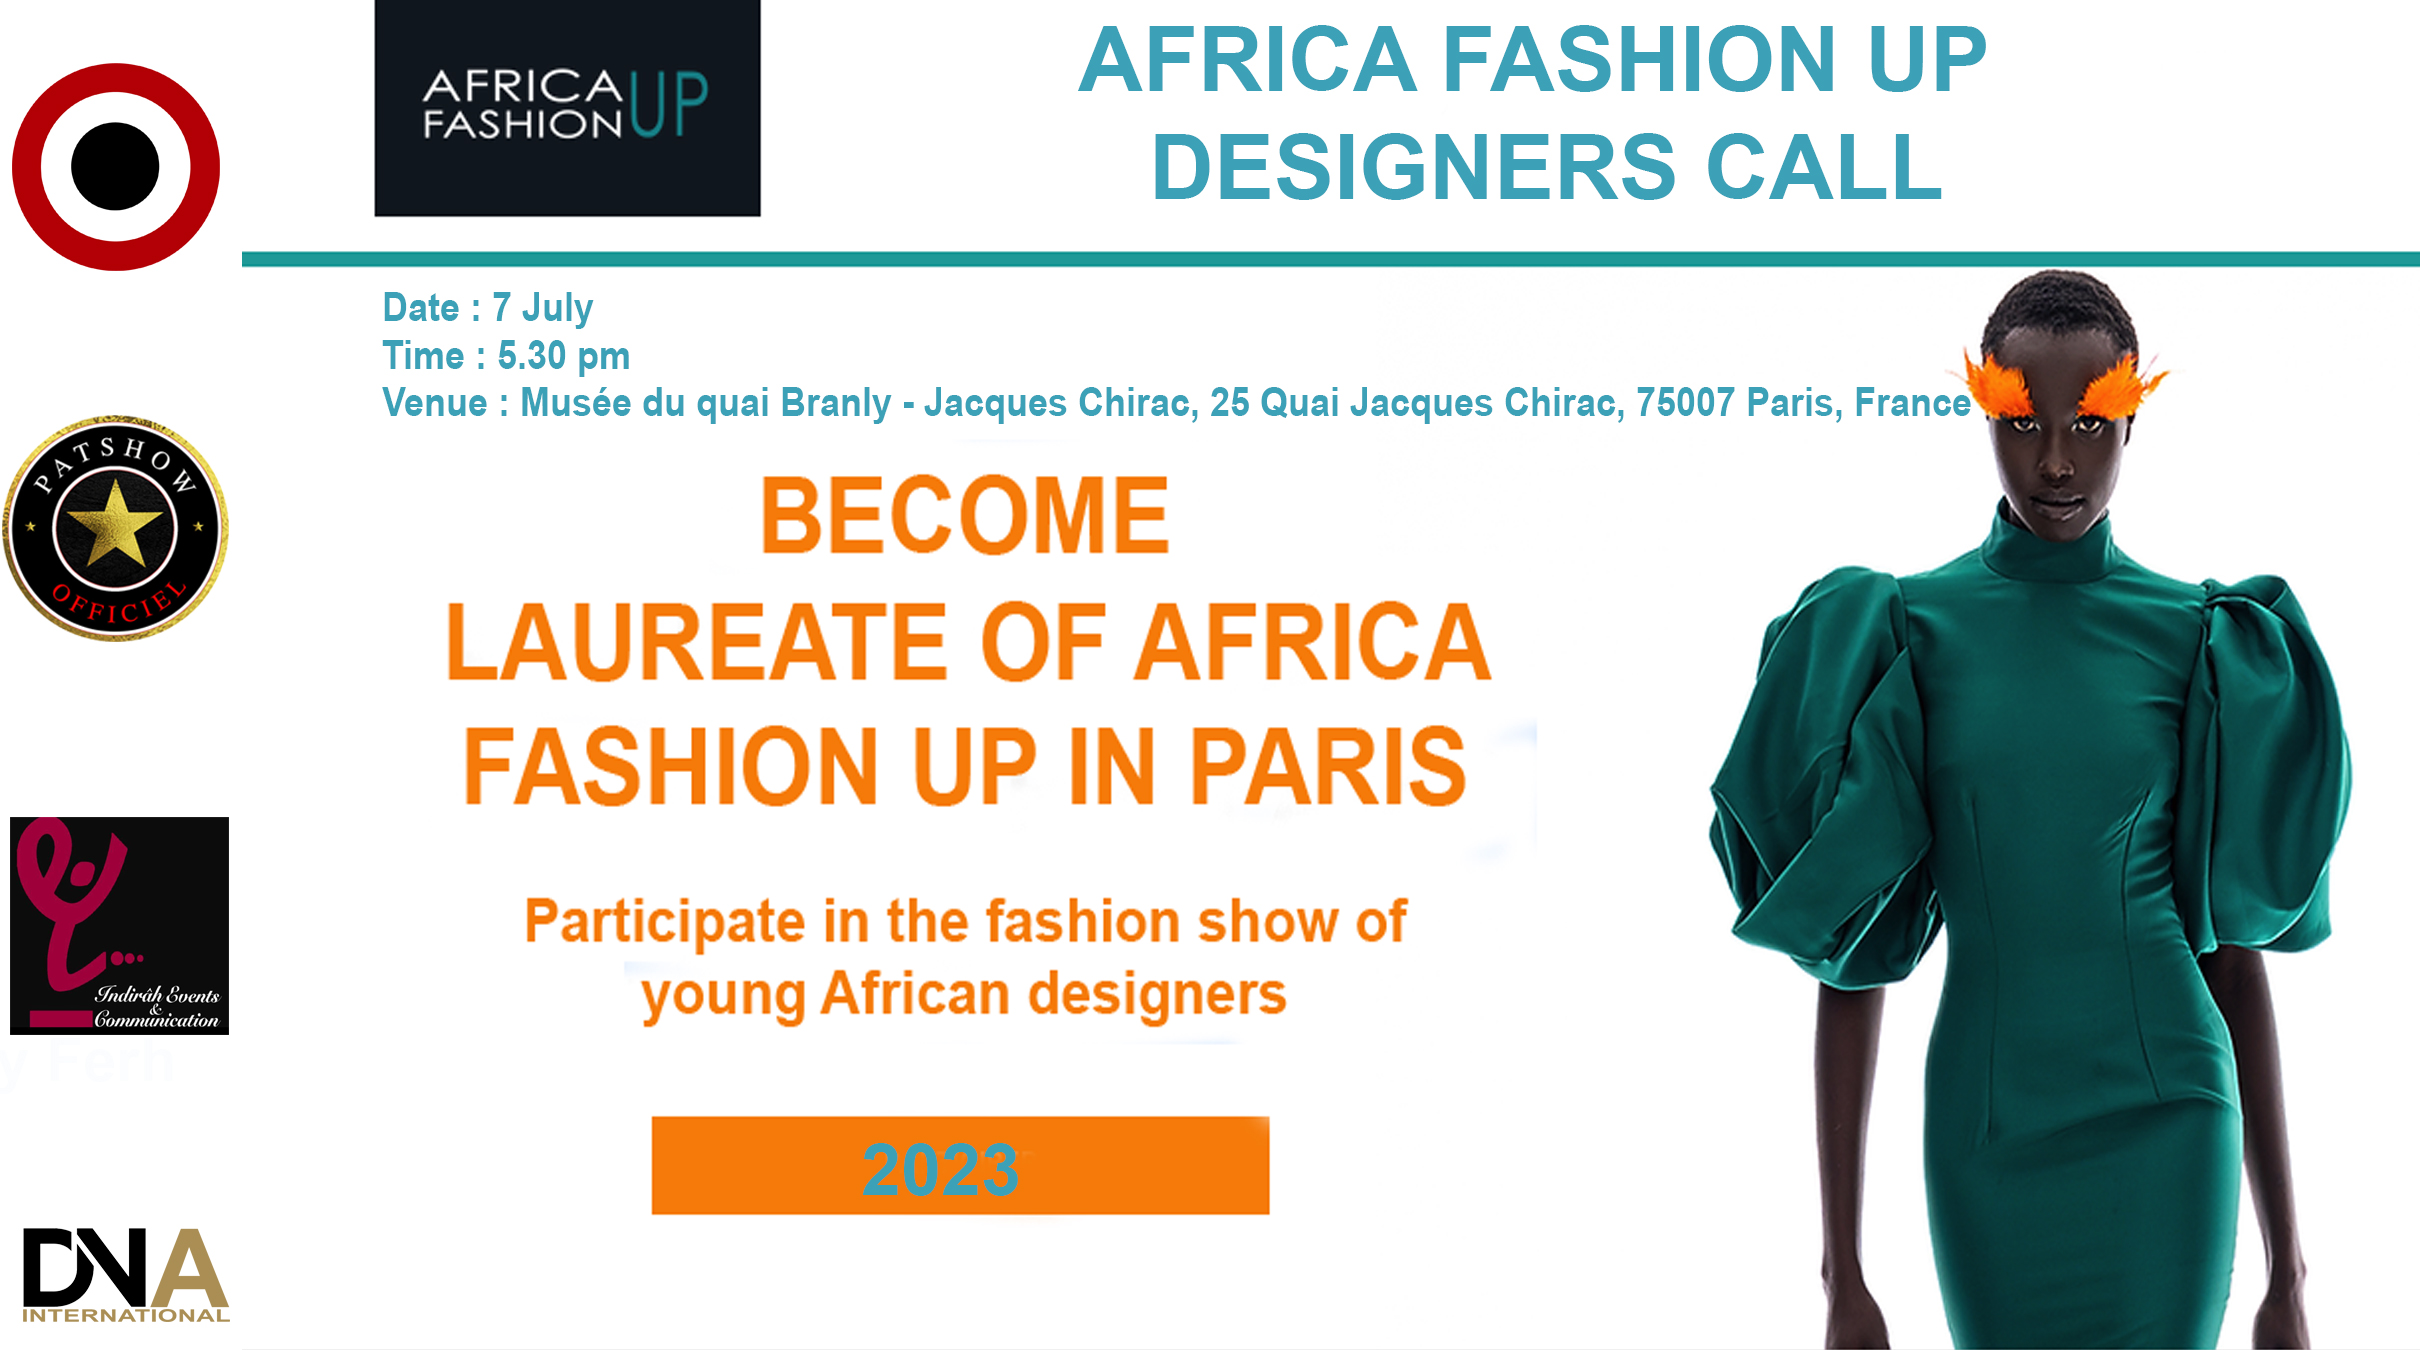 AFRICA-VOGUE-COVER-AFRICA-FASHION-UP-DESIGNERS-CALL-DN-AFRICA-DN-A-INTERNATIONAL-Media-Partner